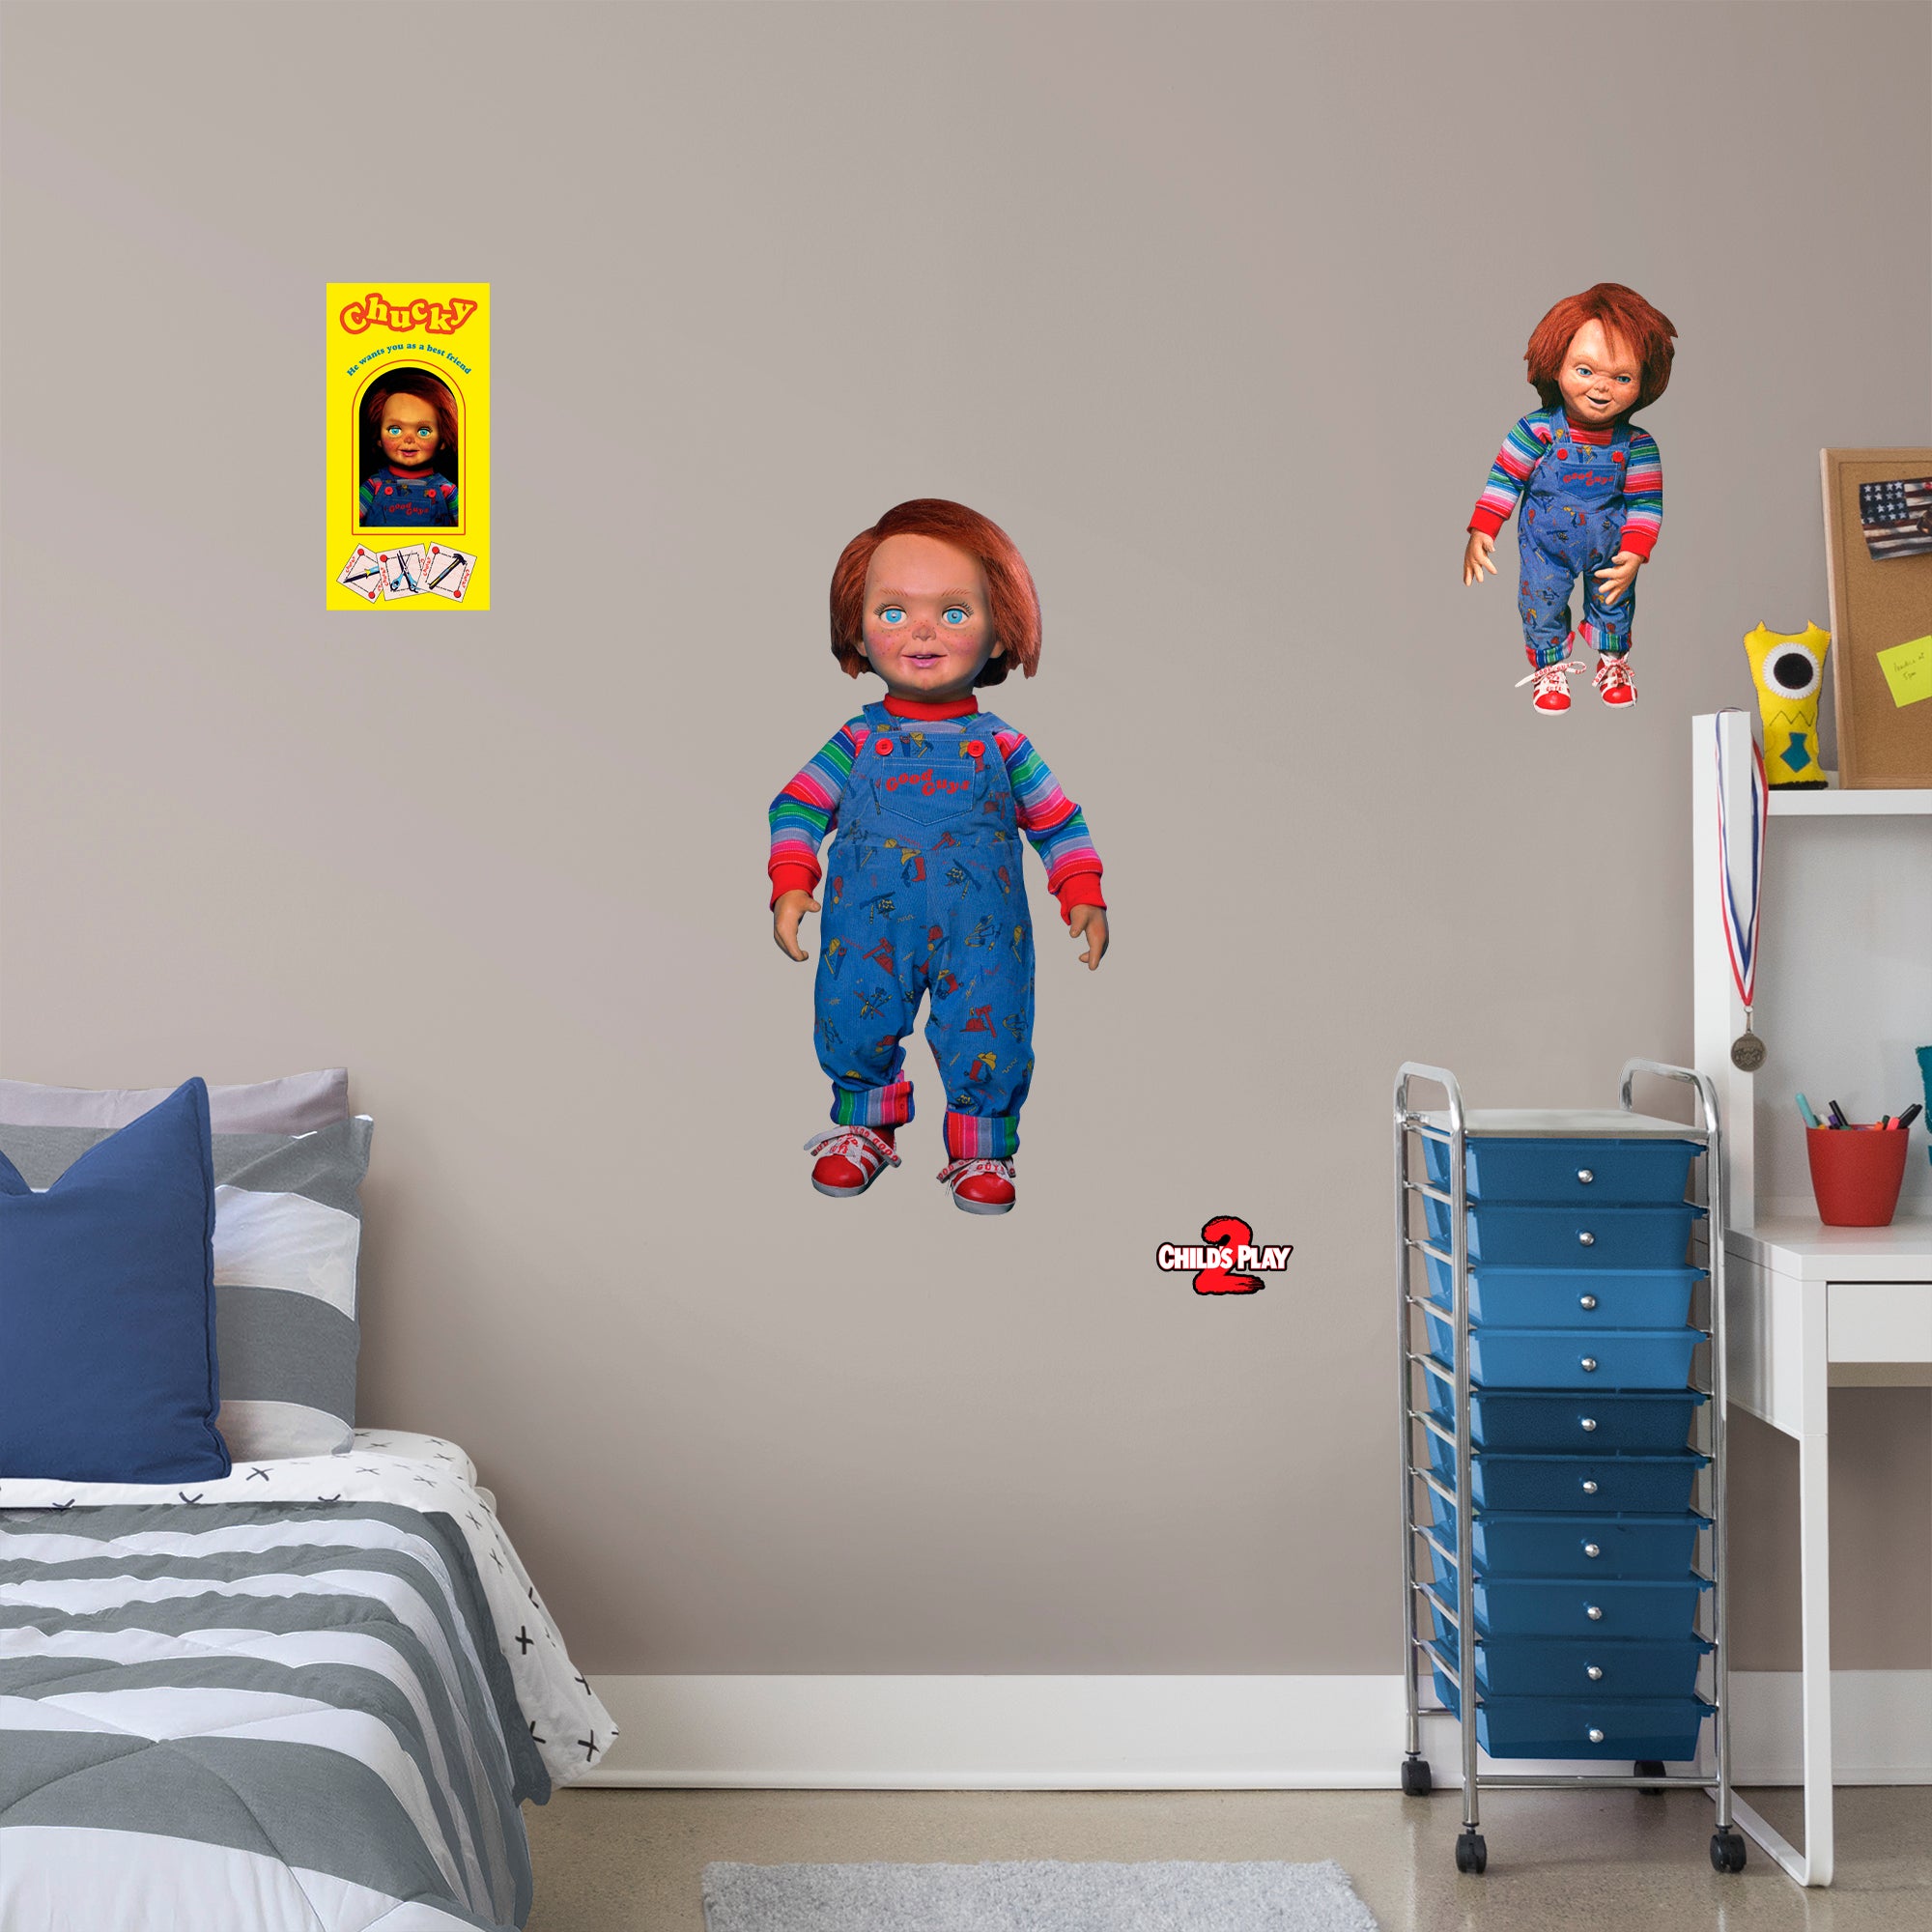 Chucky: Officially Licensed Removable Wall Decal XL by Fathead | Vinyl